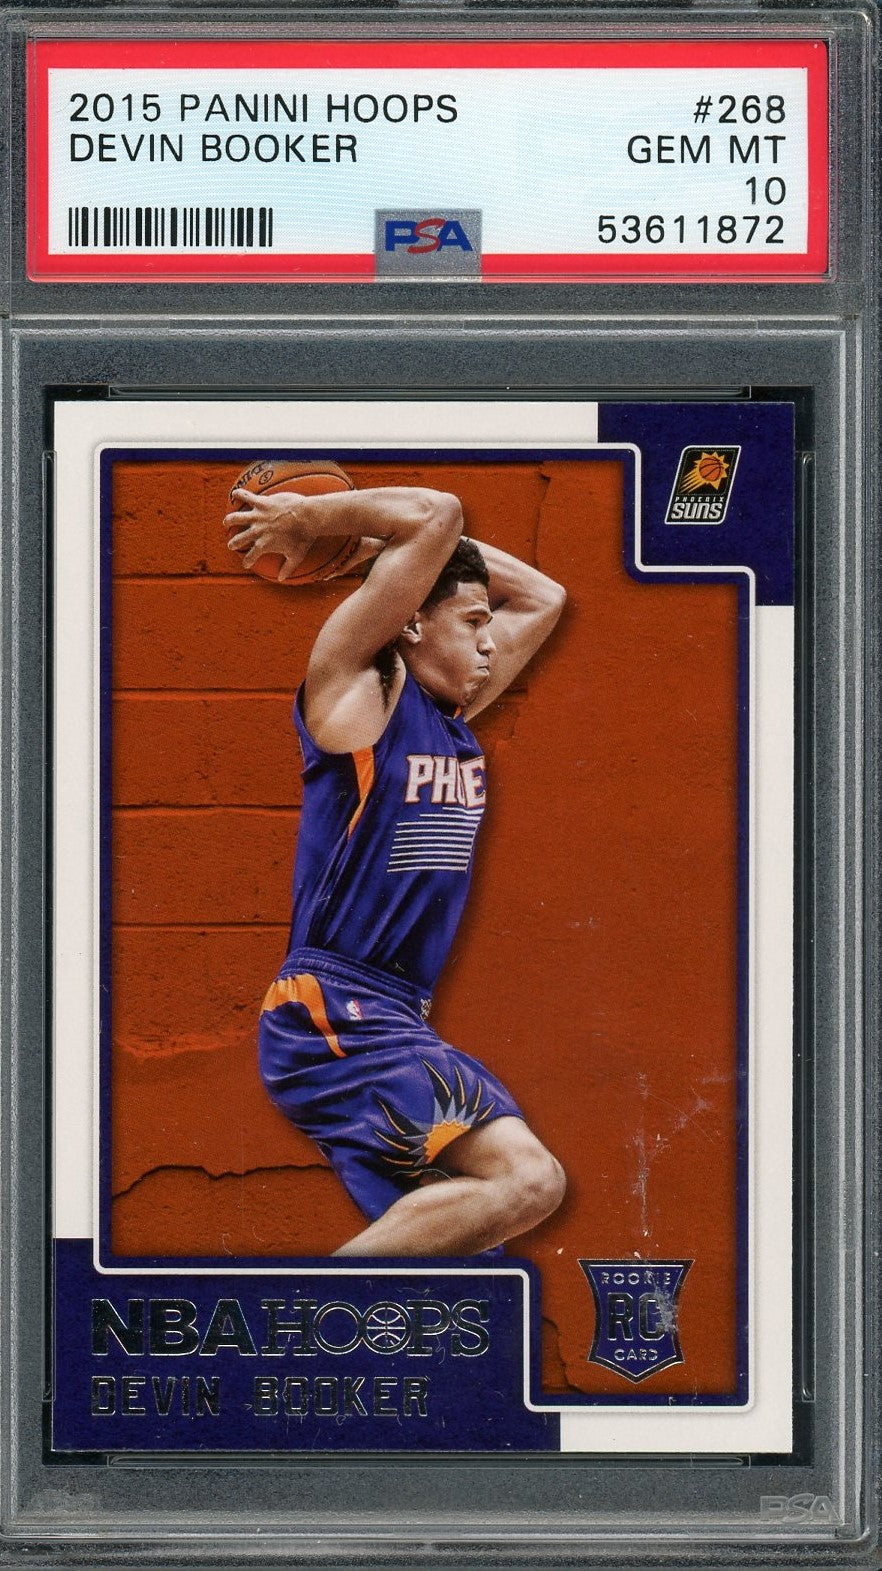 Devin Booker 2015 Panini Hoops Basketball Rookie Card #268 Graded PSA 10